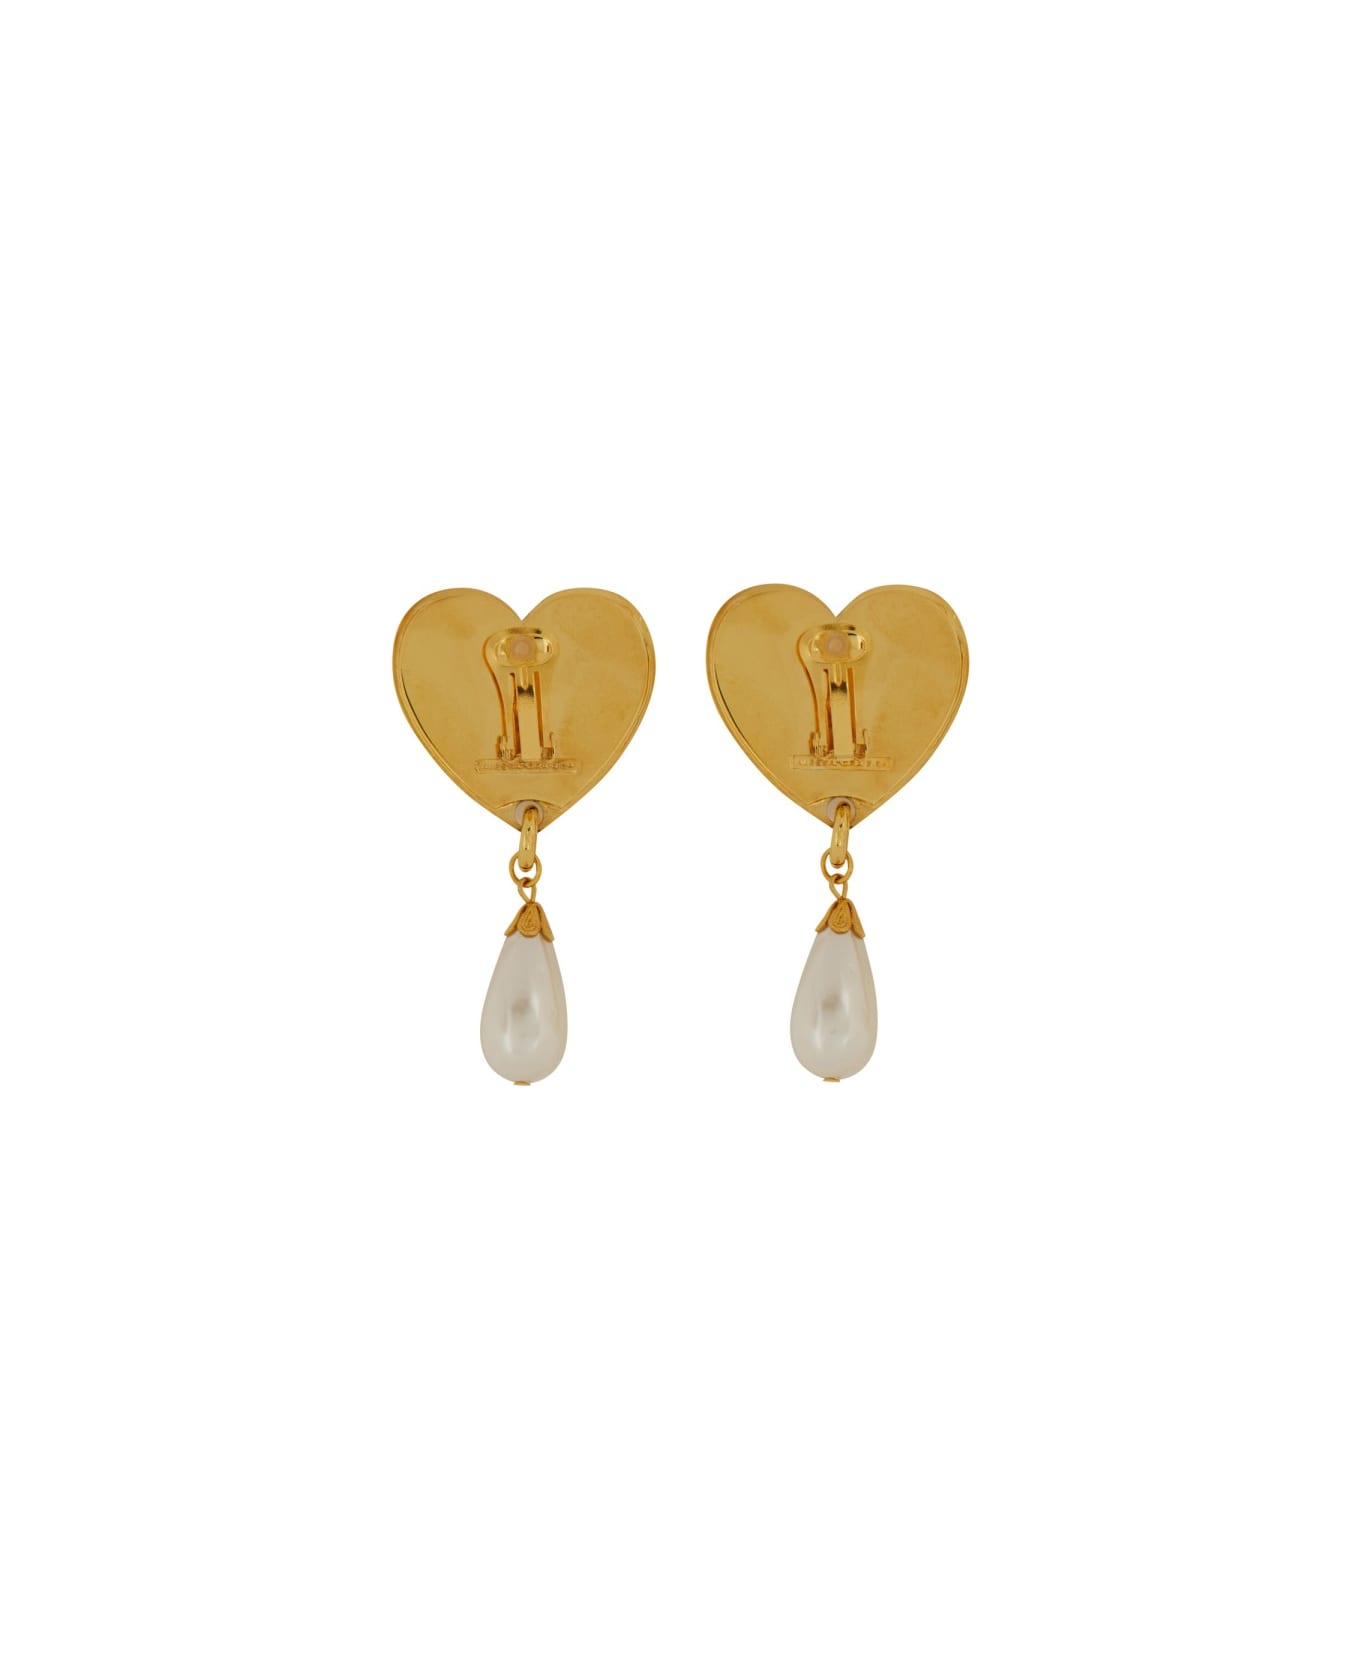 Alessandra Rich Metal Heart Earrings With Crystals - GOLD